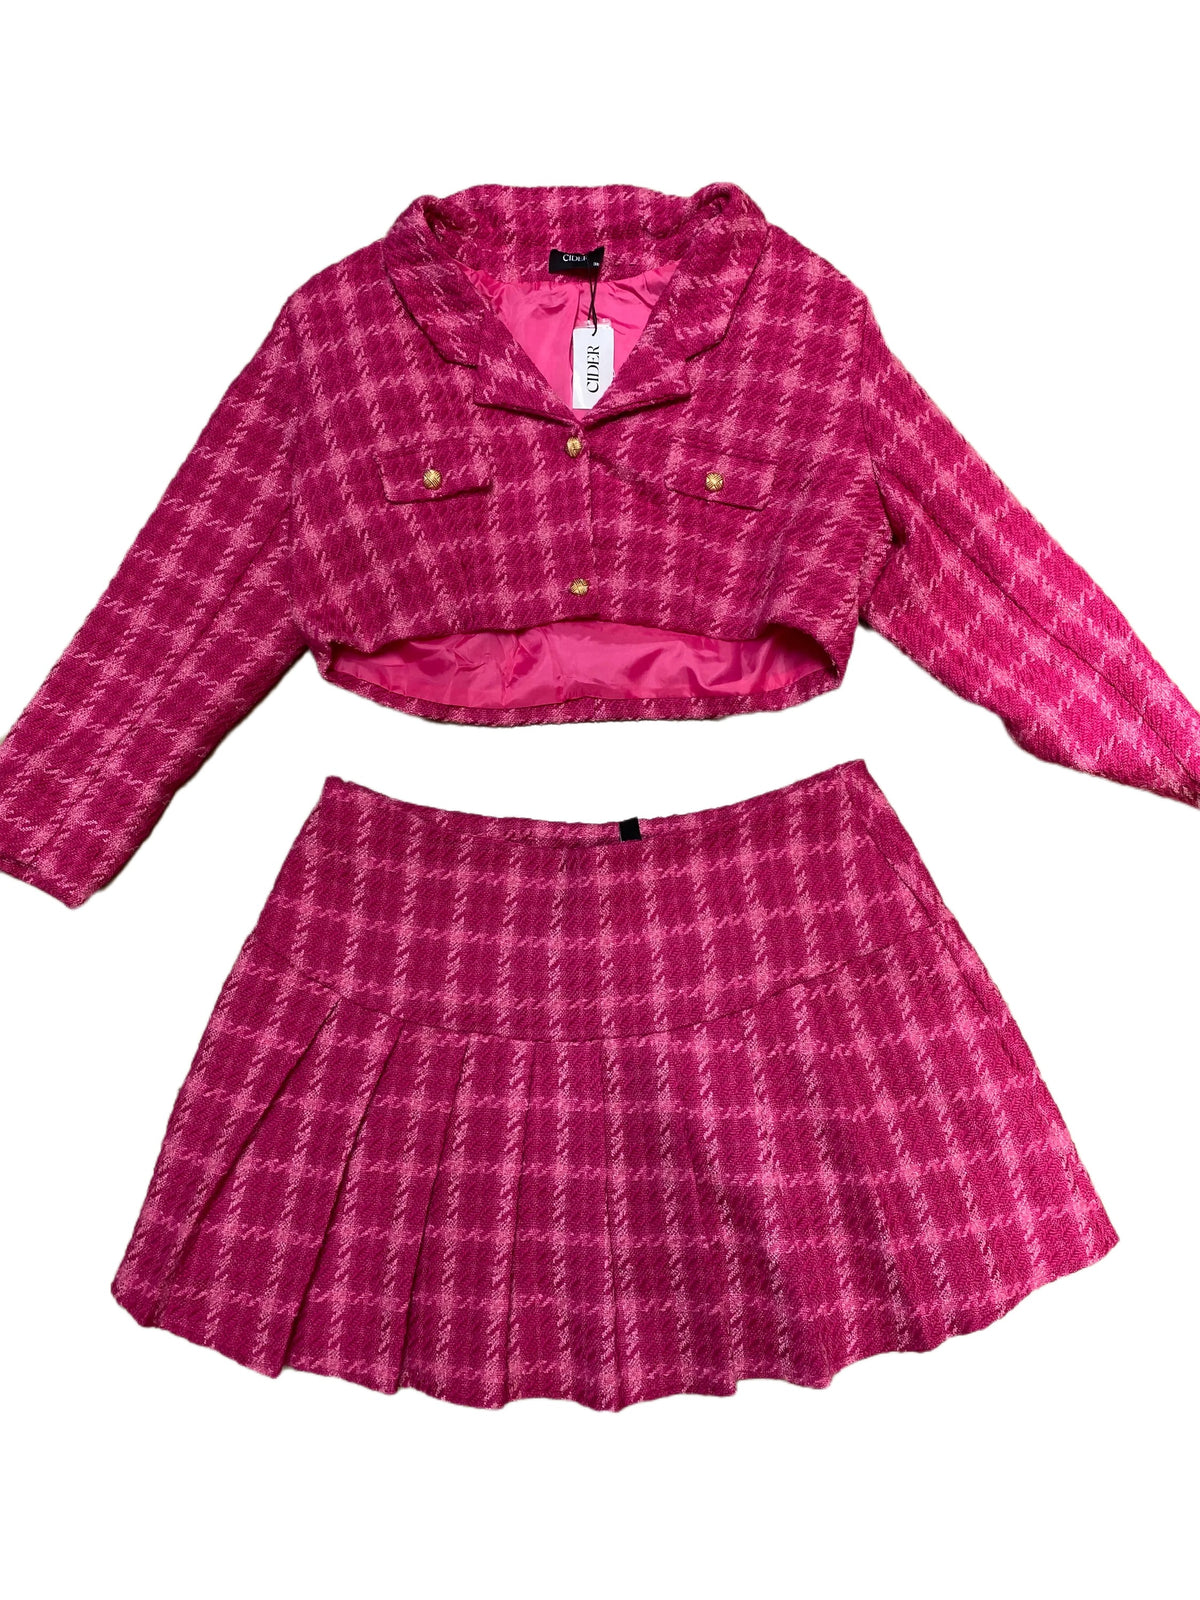 Cider Pink Plaid Blazer and Skirt Set - NEW WITH TAGS